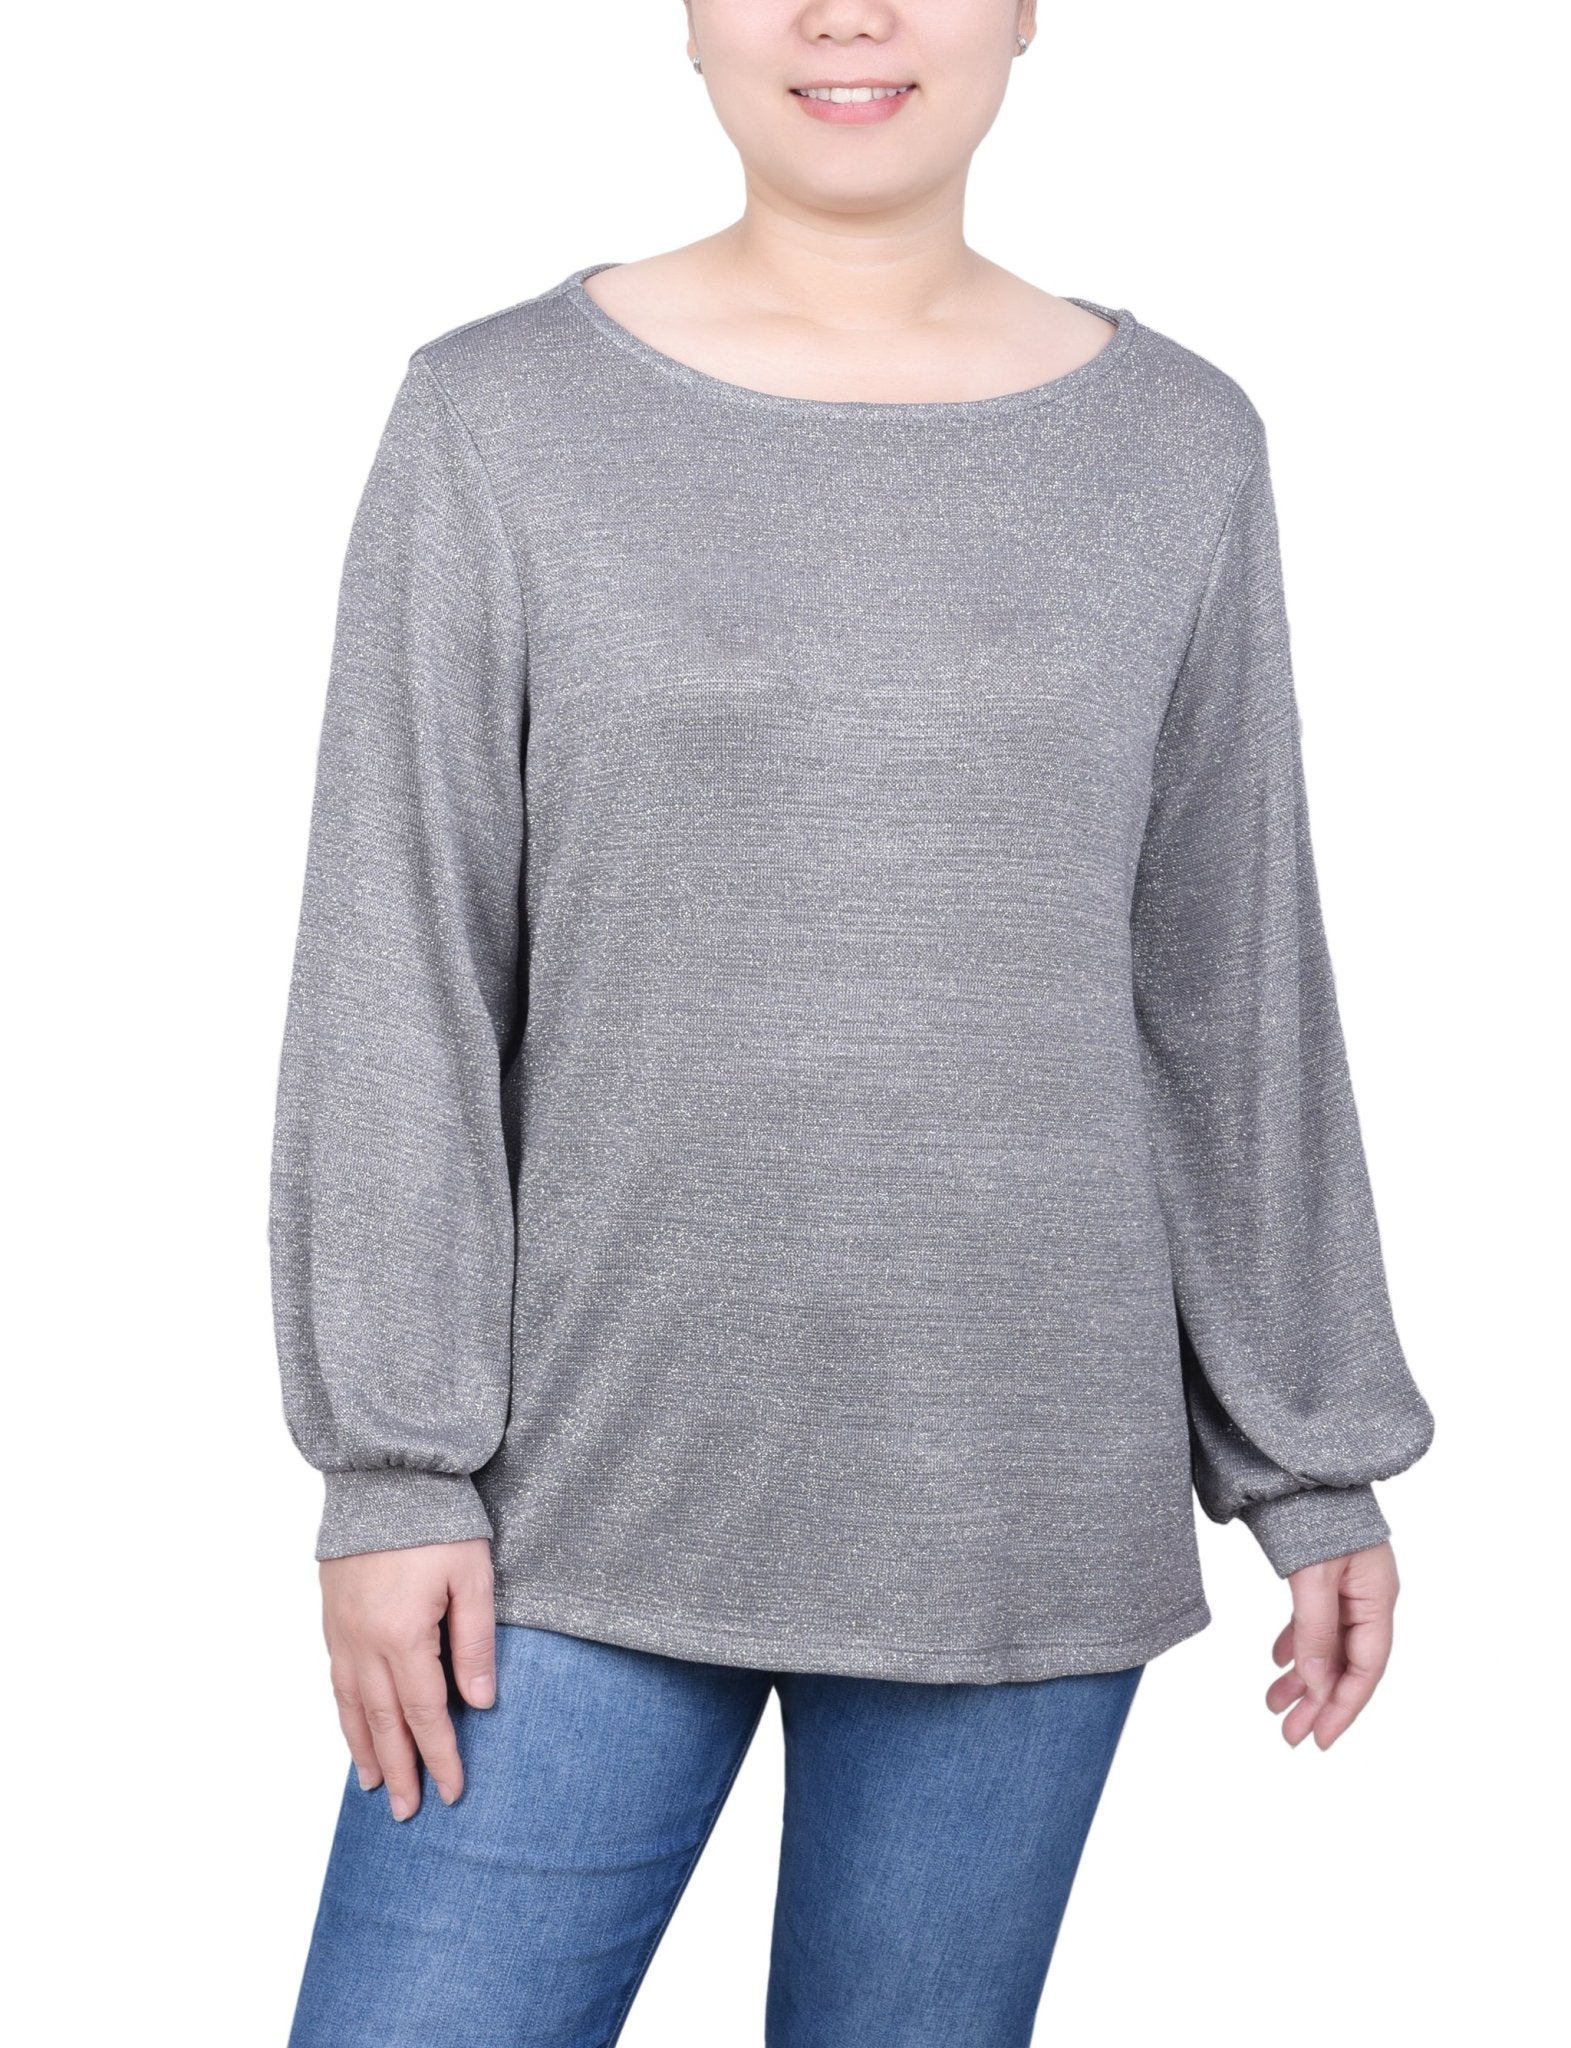 NY Collection Long Sleeve Tunic Top With Detachable Necklace - Petite - DressbarnShirts & Blouses